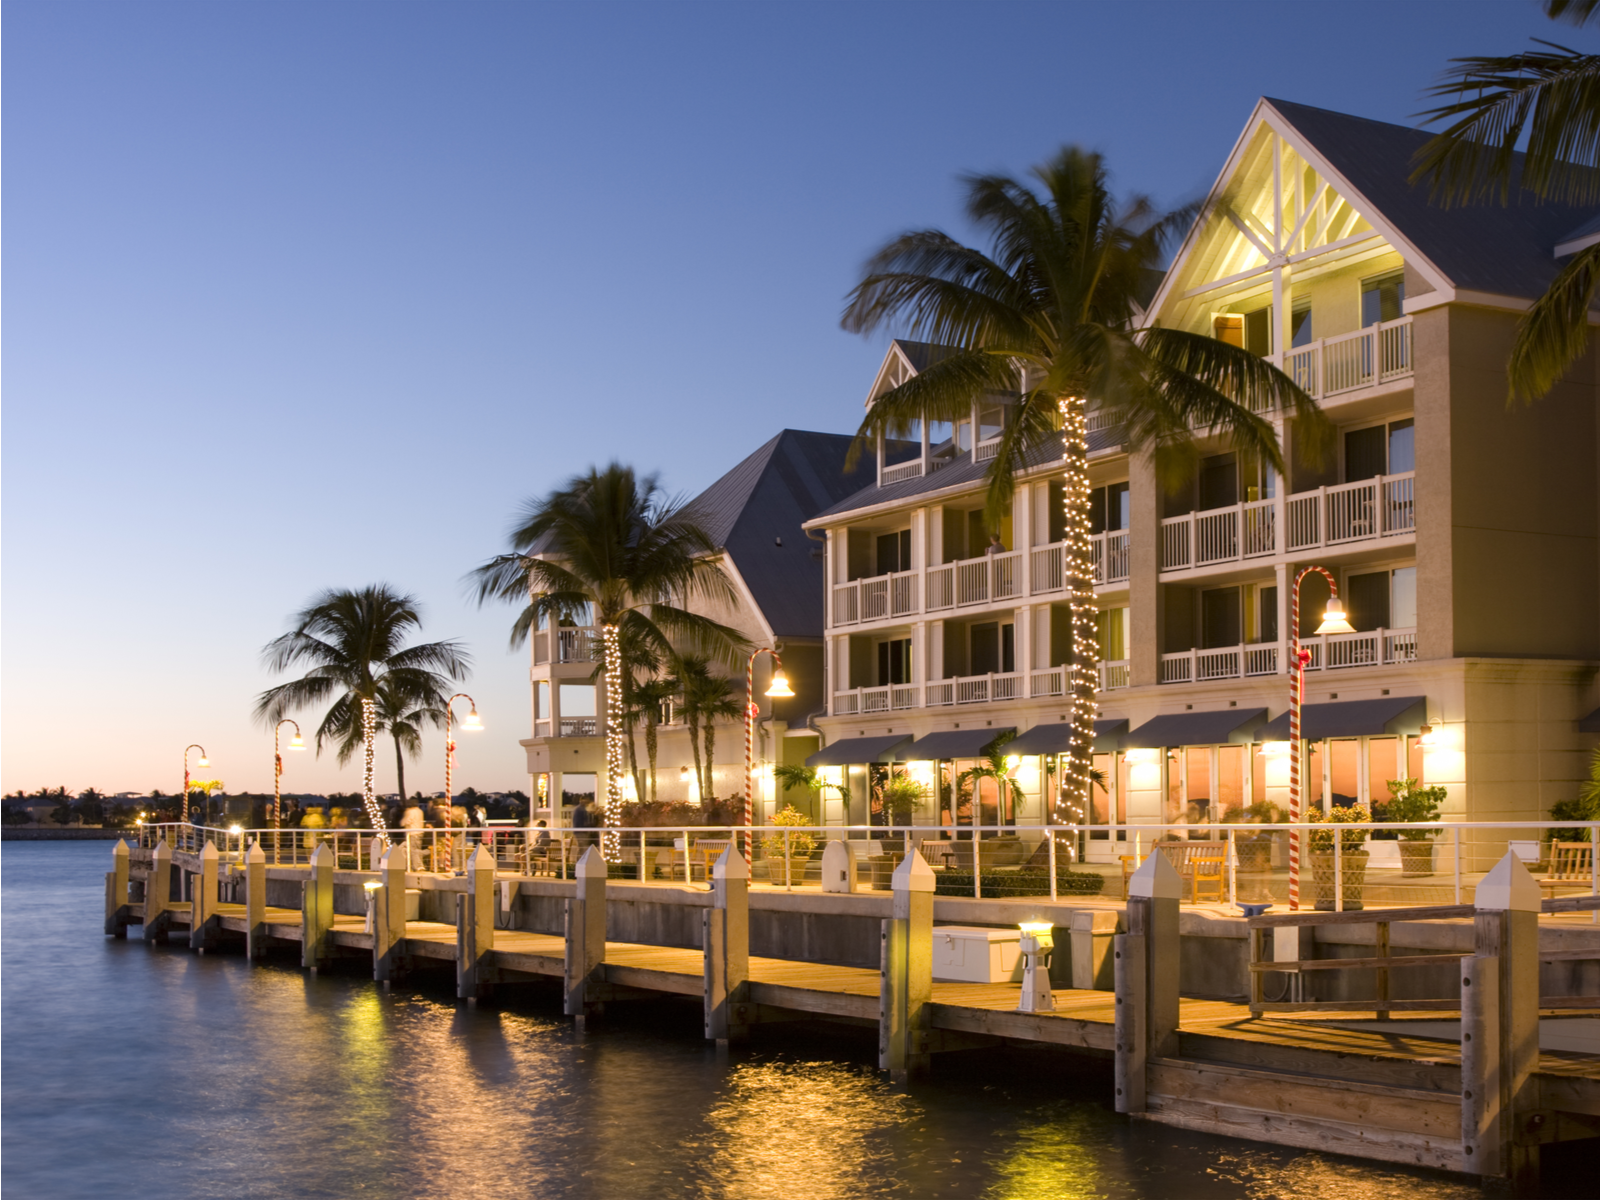 Hotel on a dock in Key West at sunset